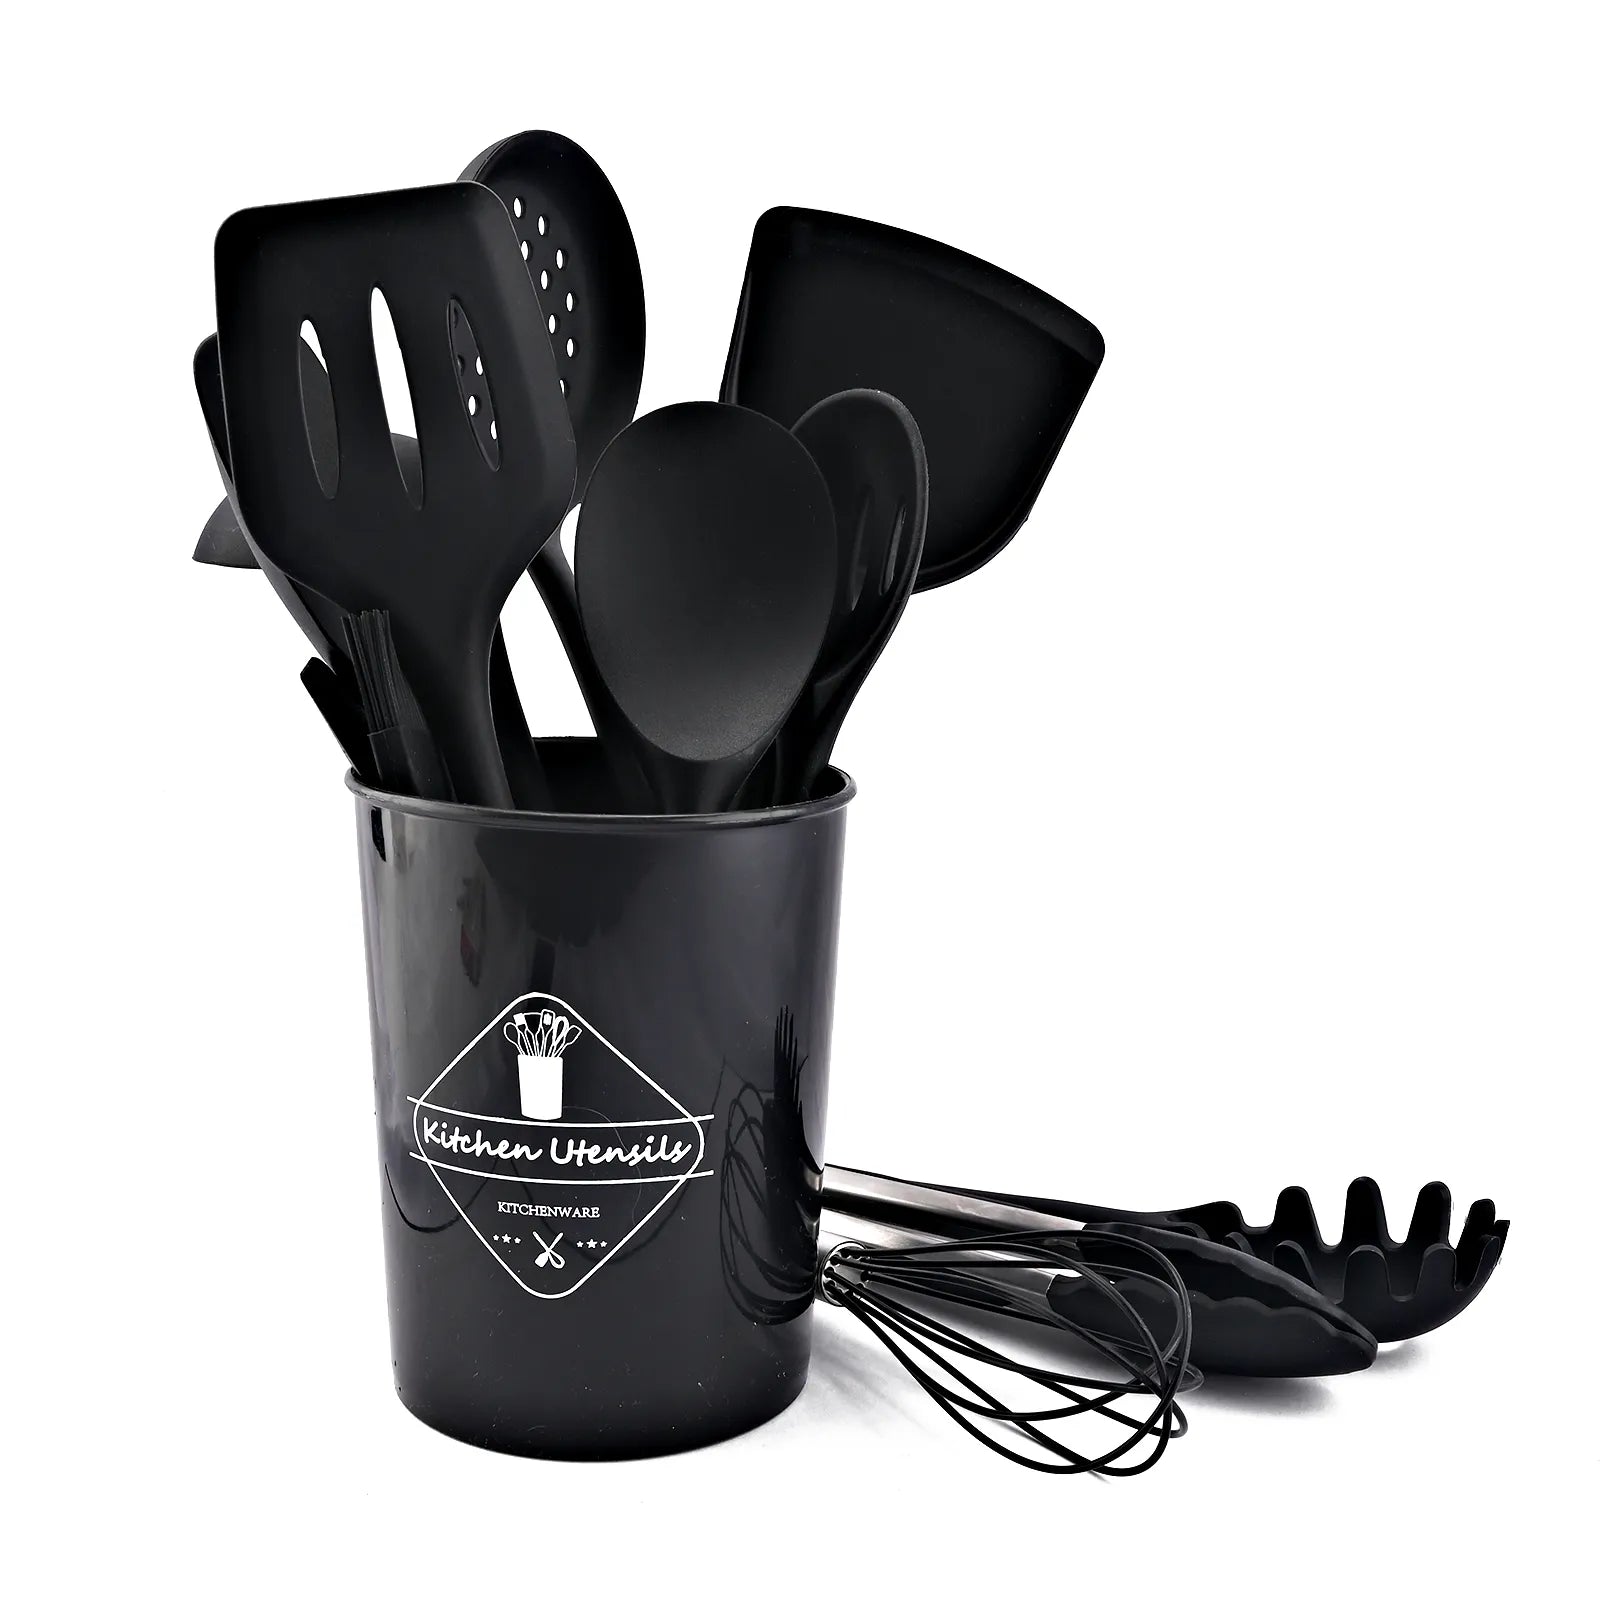 New Black Non-Stick Cookware Silicone Kitchenware Tool Cooking Utensils Set Spatula Ladle Egg Beaters Shovel Kitchen Accessories